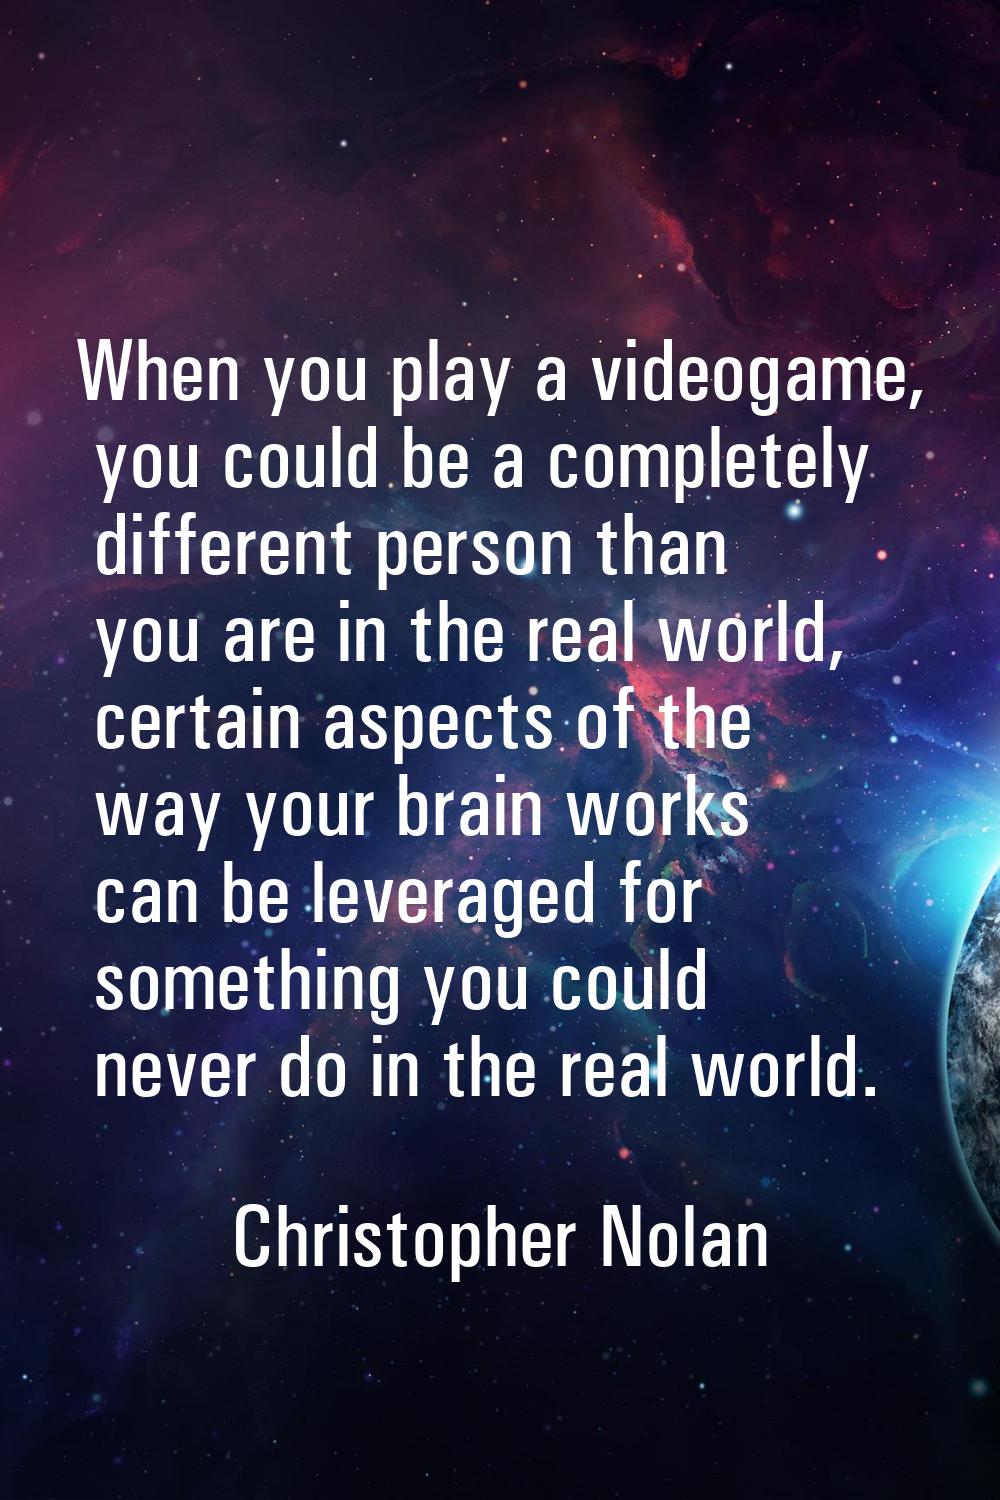 When you play a videogame, you could be a completely different person than you are in the real worl